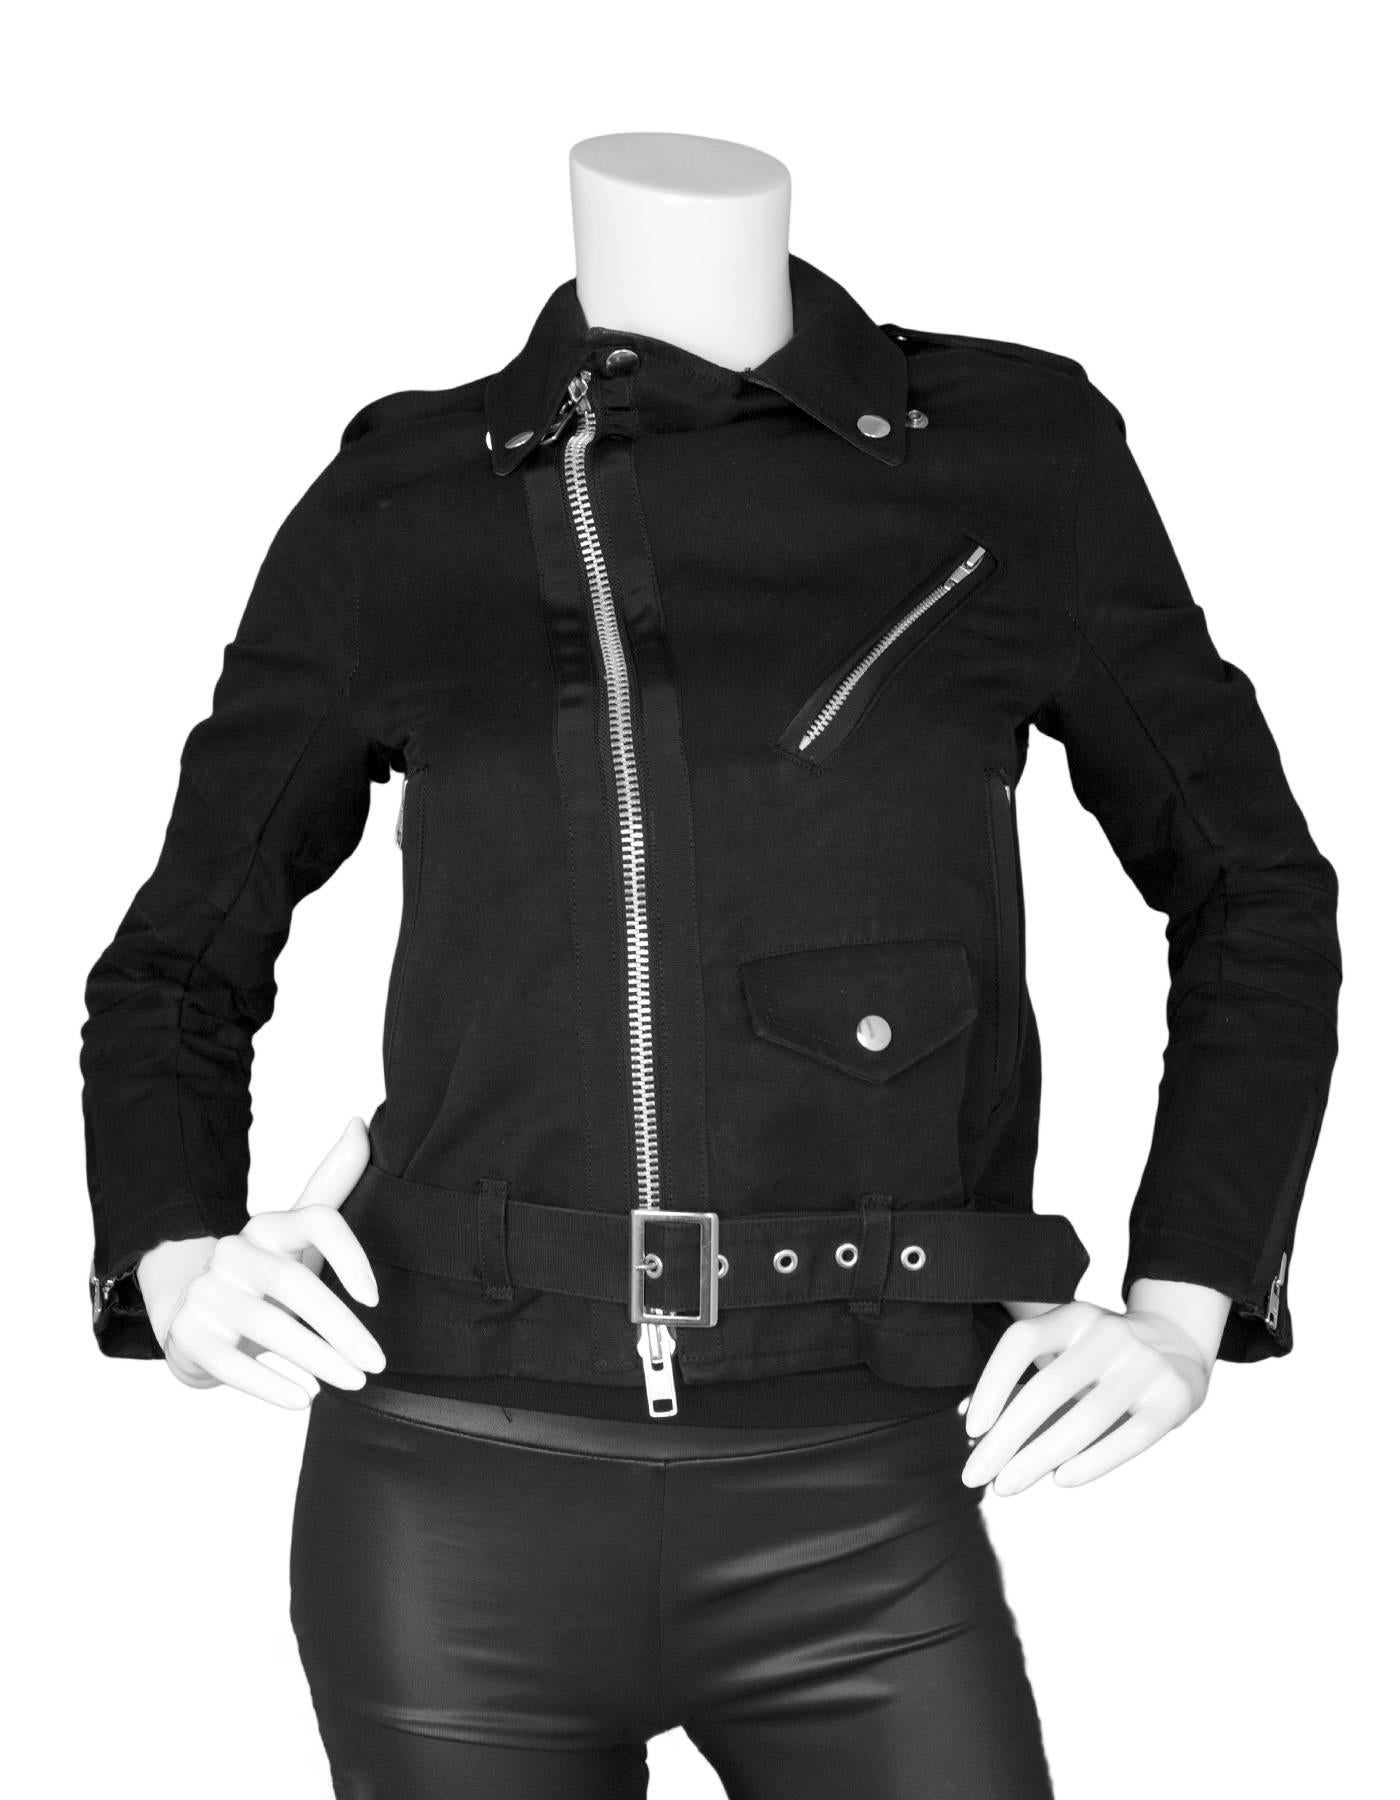 Sacai Black Cotton Moto Jacket sz US2
Features peplum hemline at back of jacket 

Made In: Japan
Color: Black
Composition: 58% cotton, 42% linen
Lining: Black, 100% cupro
Closure/Opening: Front zip up and waist belt
Exterior Pockets: Three zipper